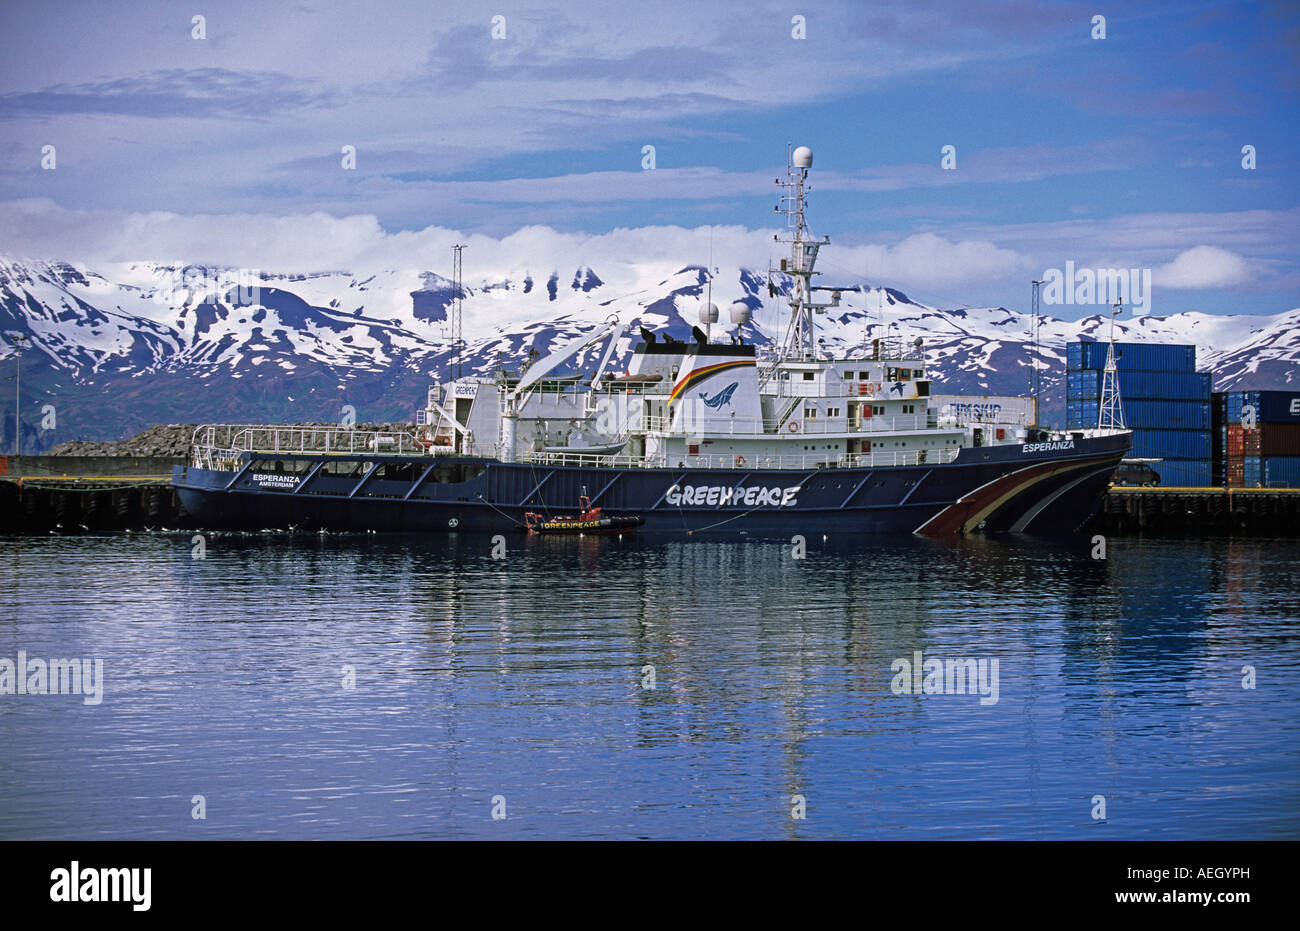 Iceland Husavik, Centre for whale watching, Harbou,r Boat Esperanza from Greenpeace Stock Photo